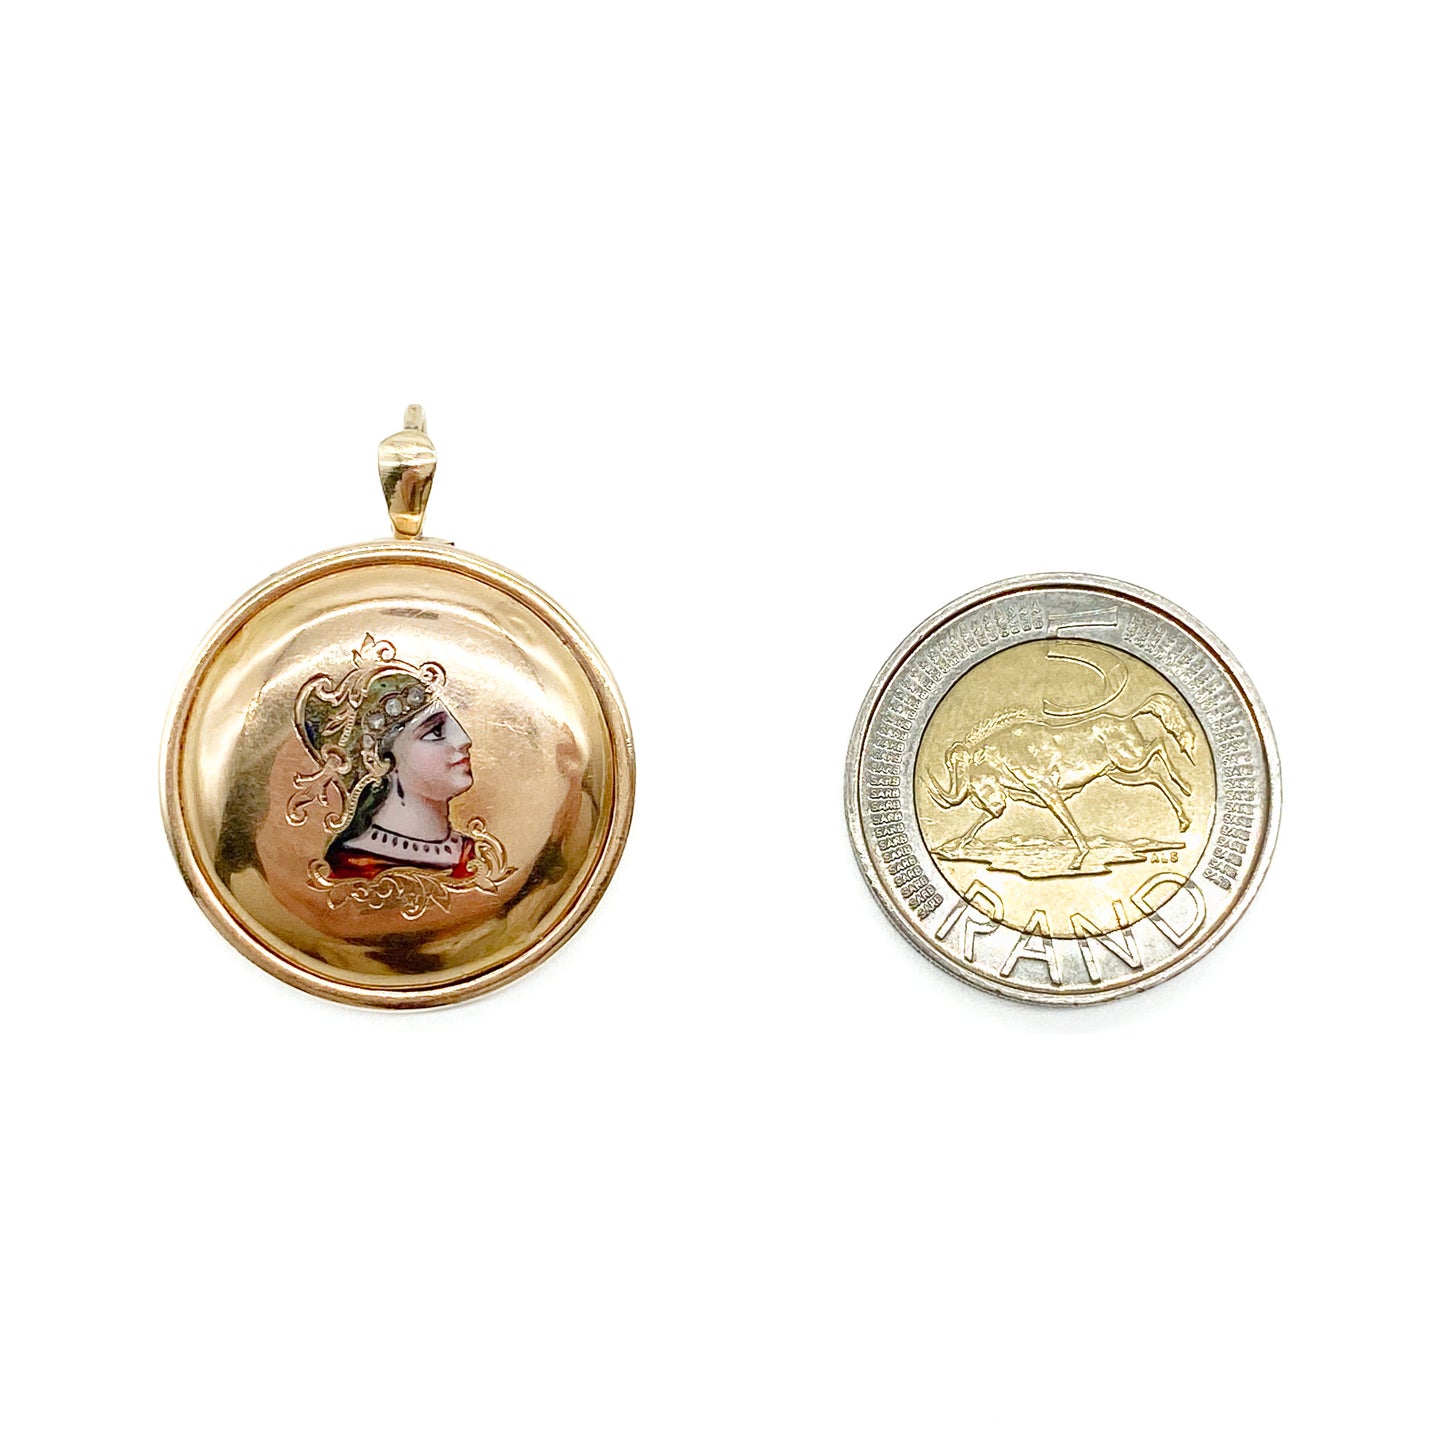 Stunning Victorian 18ct rose gold locket with an enamelled miniature portrait of a lady, set with four tiny mine cut diamonds. Glass case at the back.